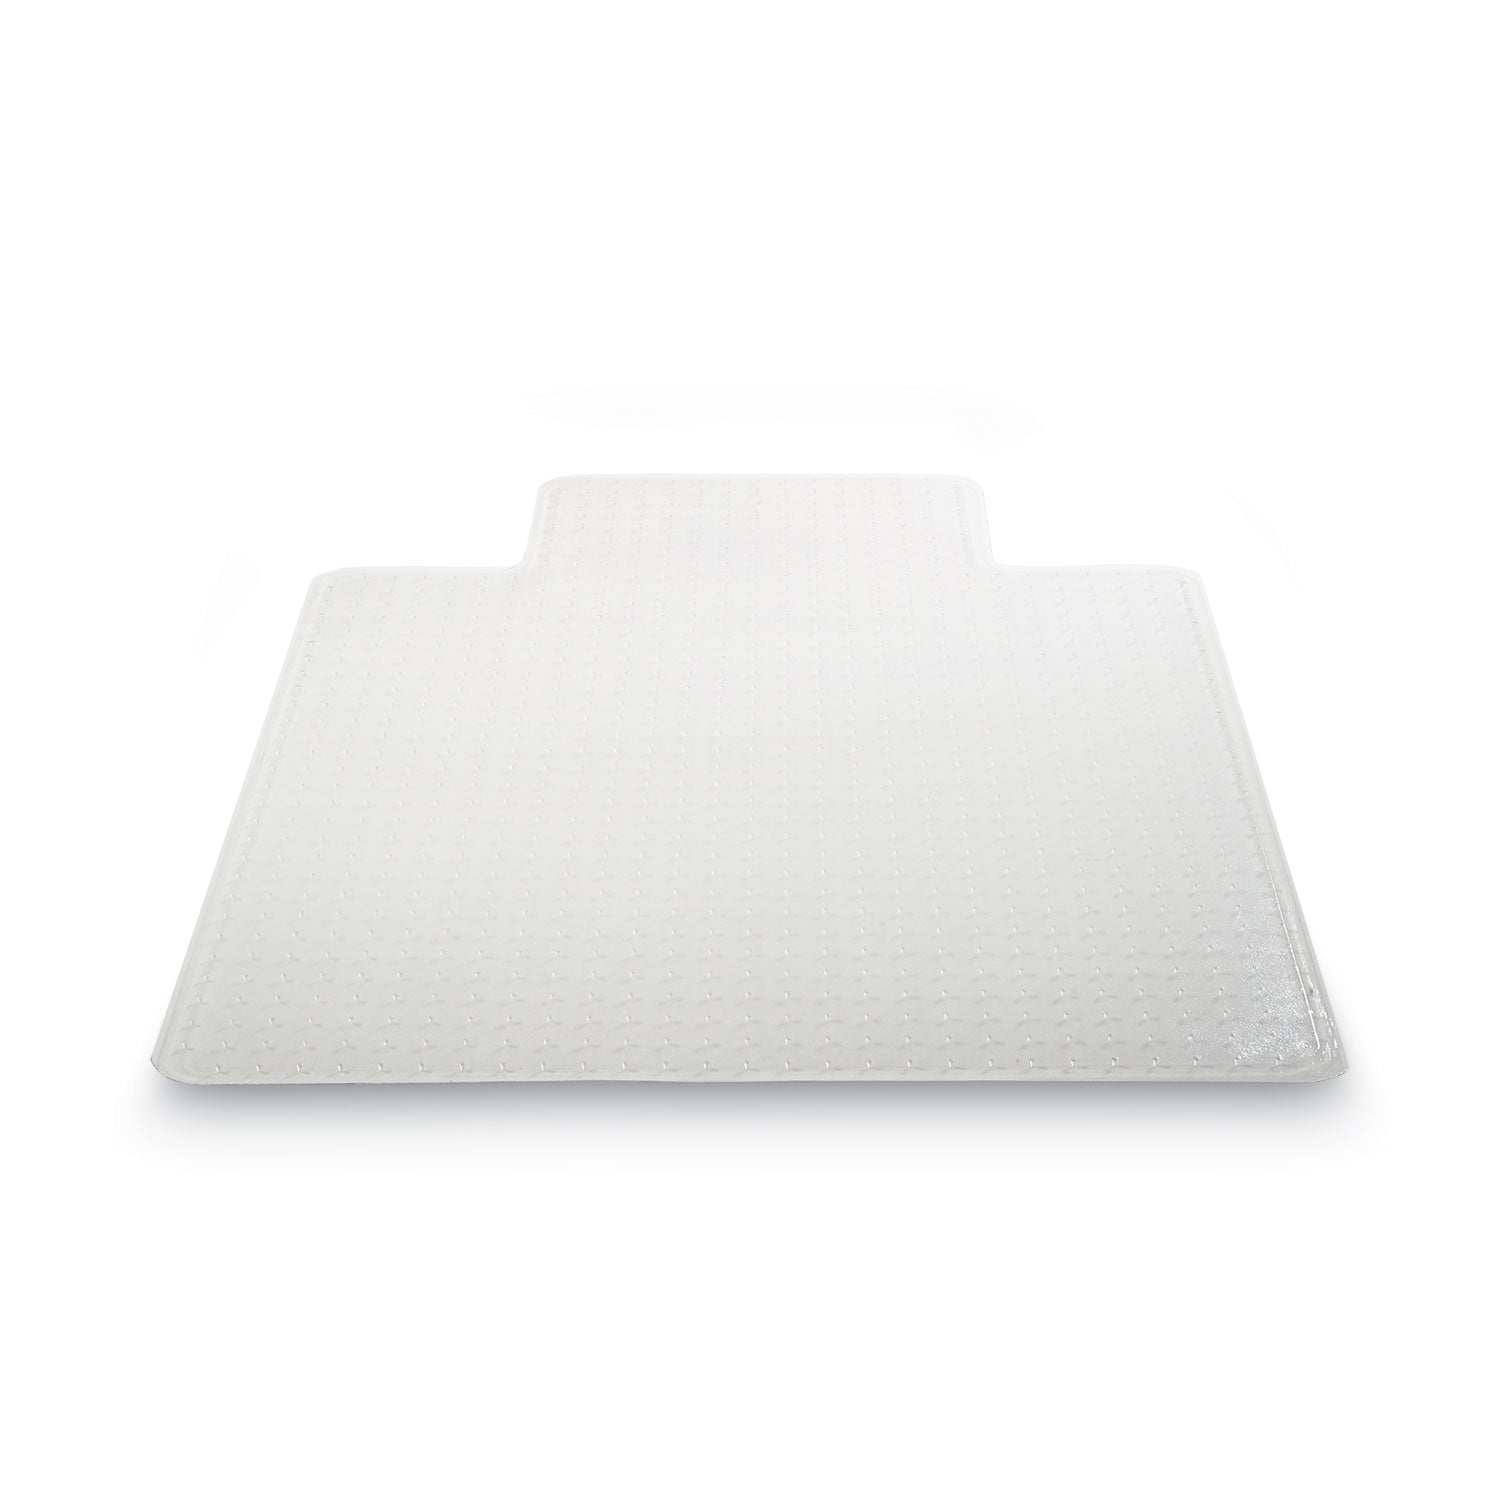 supermat-frequent-use-chair-mat-med-pile-carpet-roll-36-x-48-lipped-clear_defcm14113com - 7